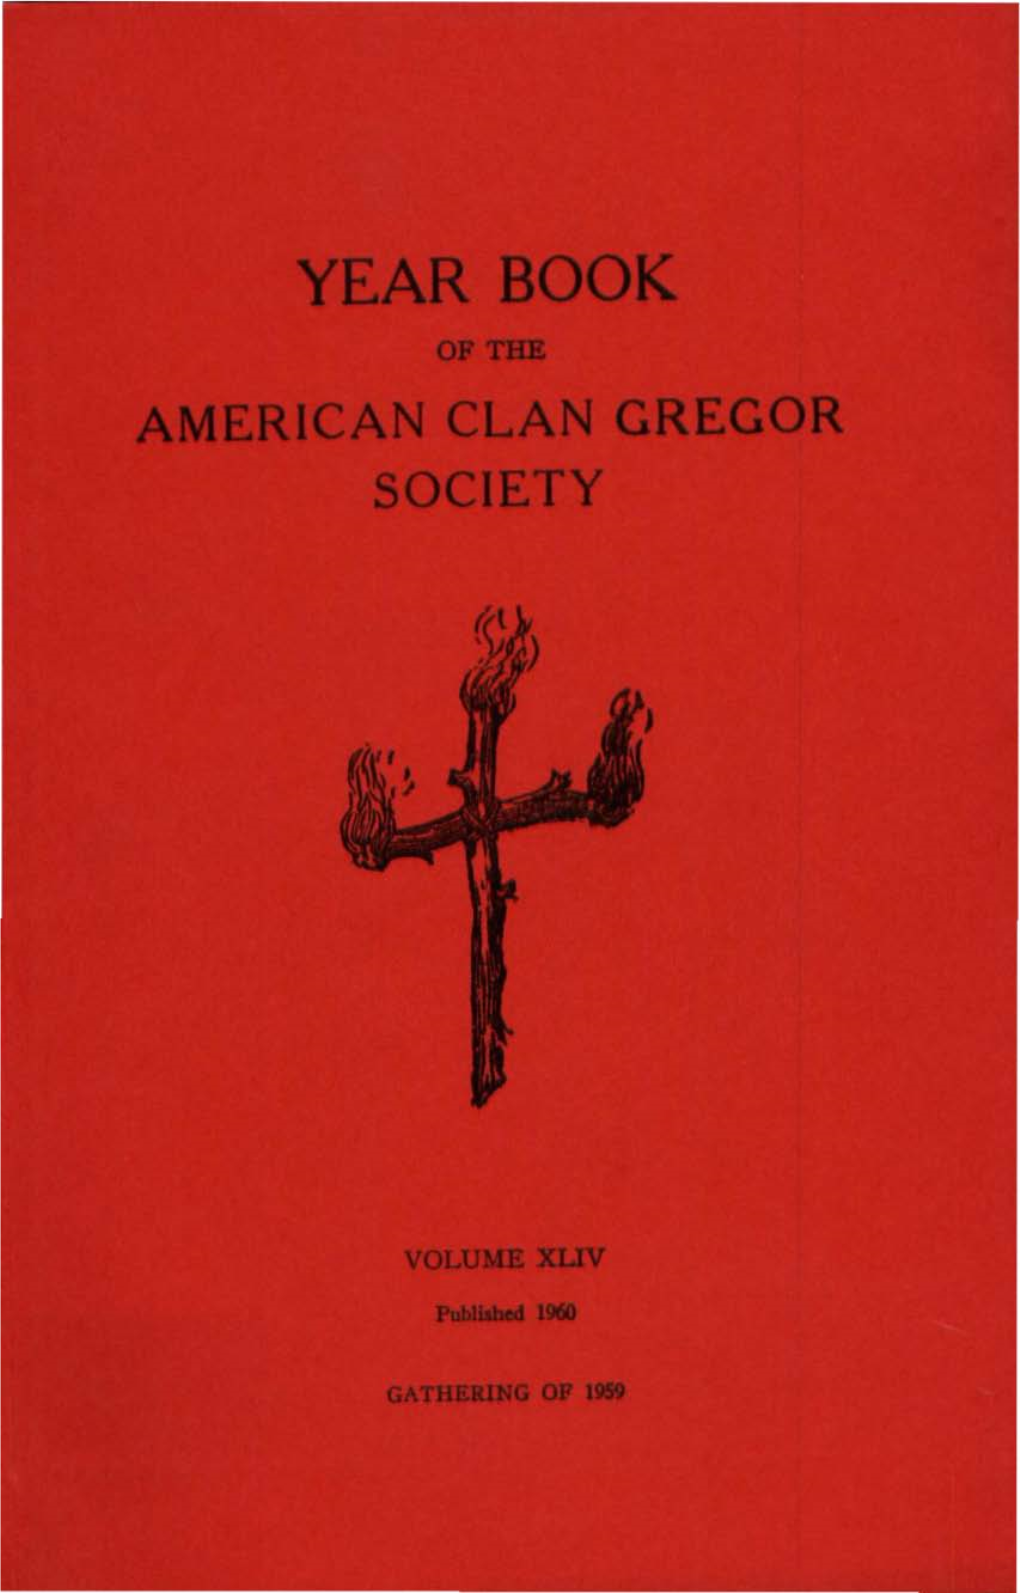 American Clan Gregor Society INCORPORATED Containing the Proceedings of the 1959 a Nnual Gathering